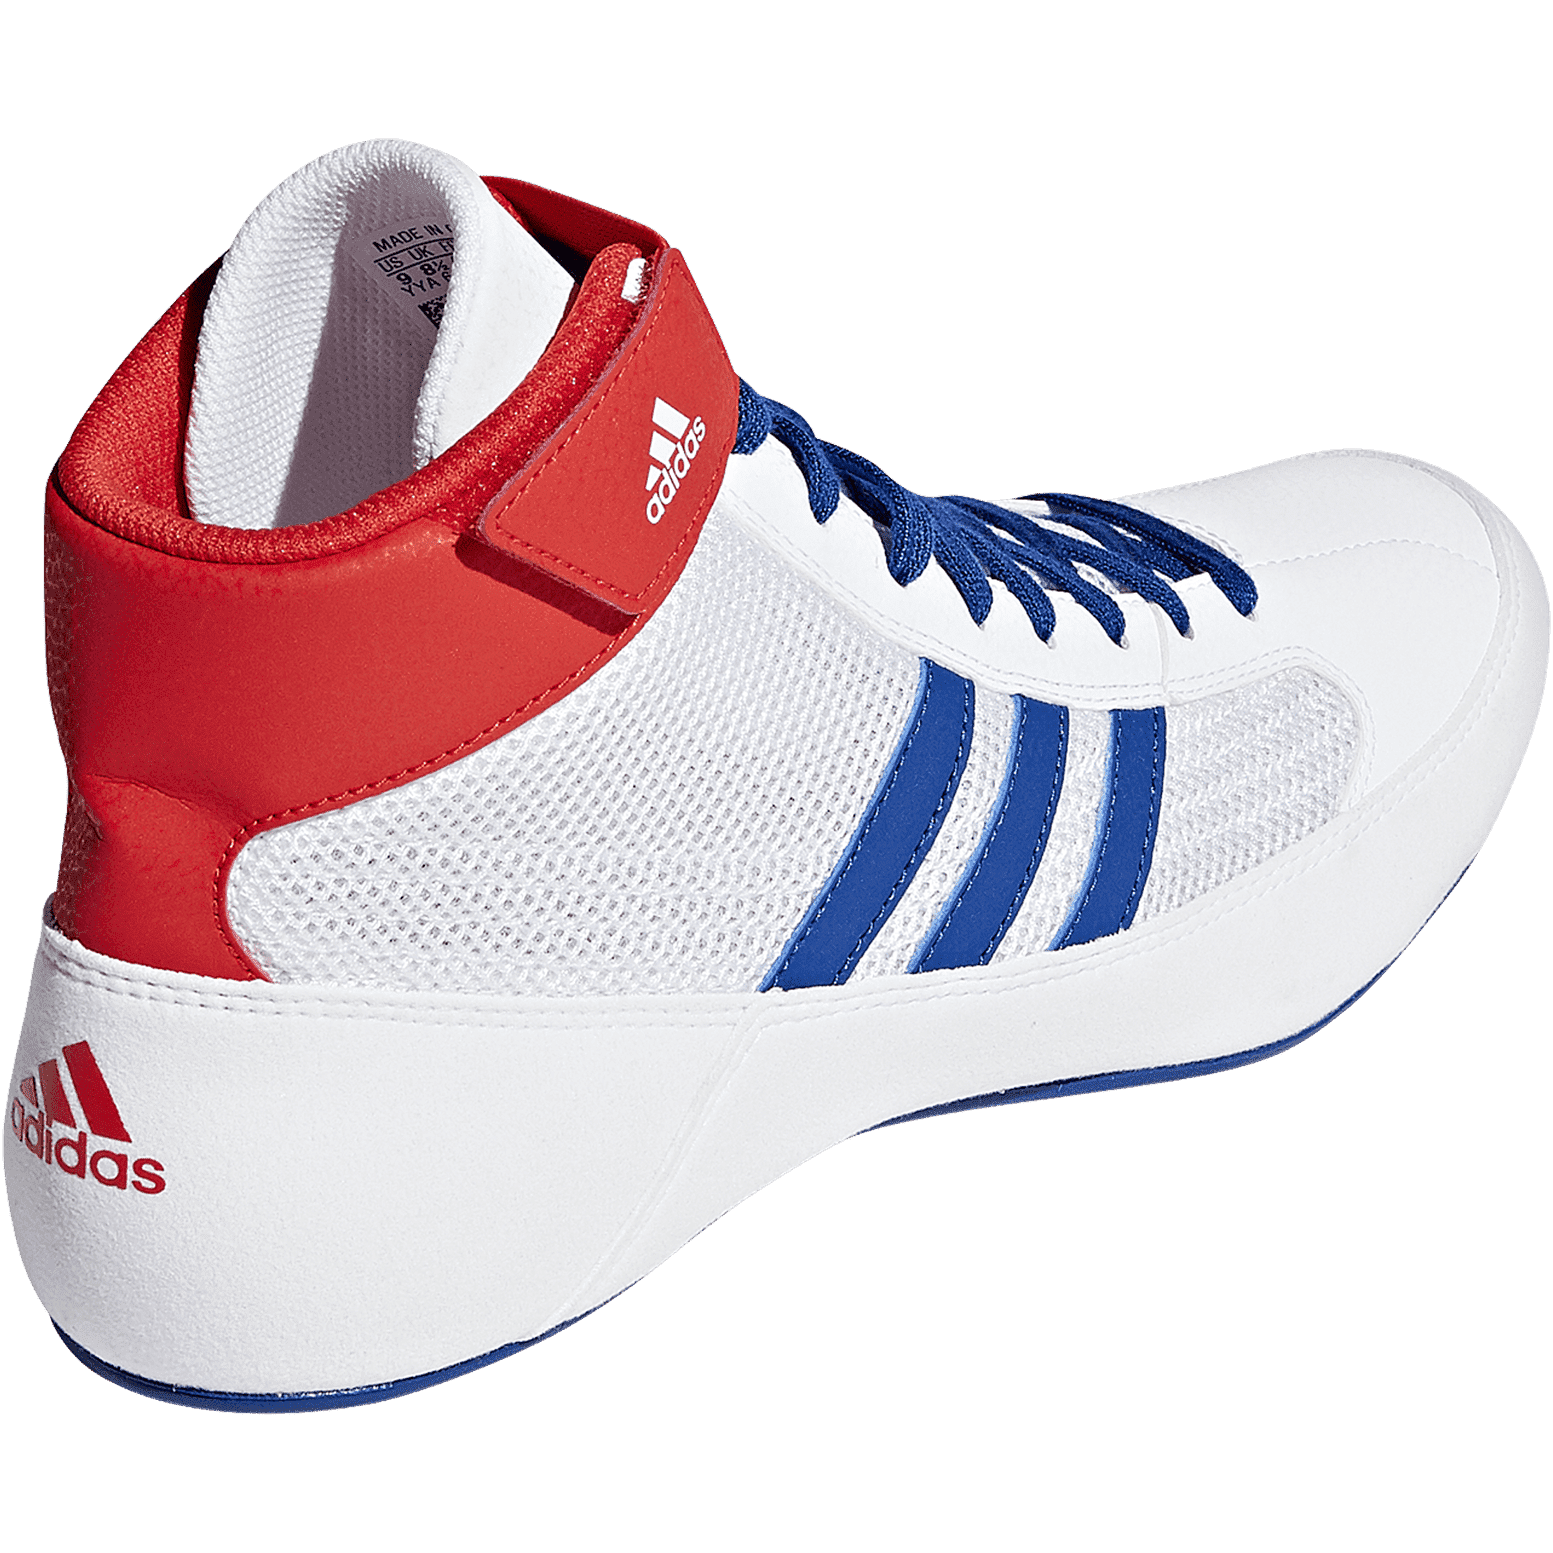 Adidas 221 HVC 2 Wrestling Shoes - White Red Royal